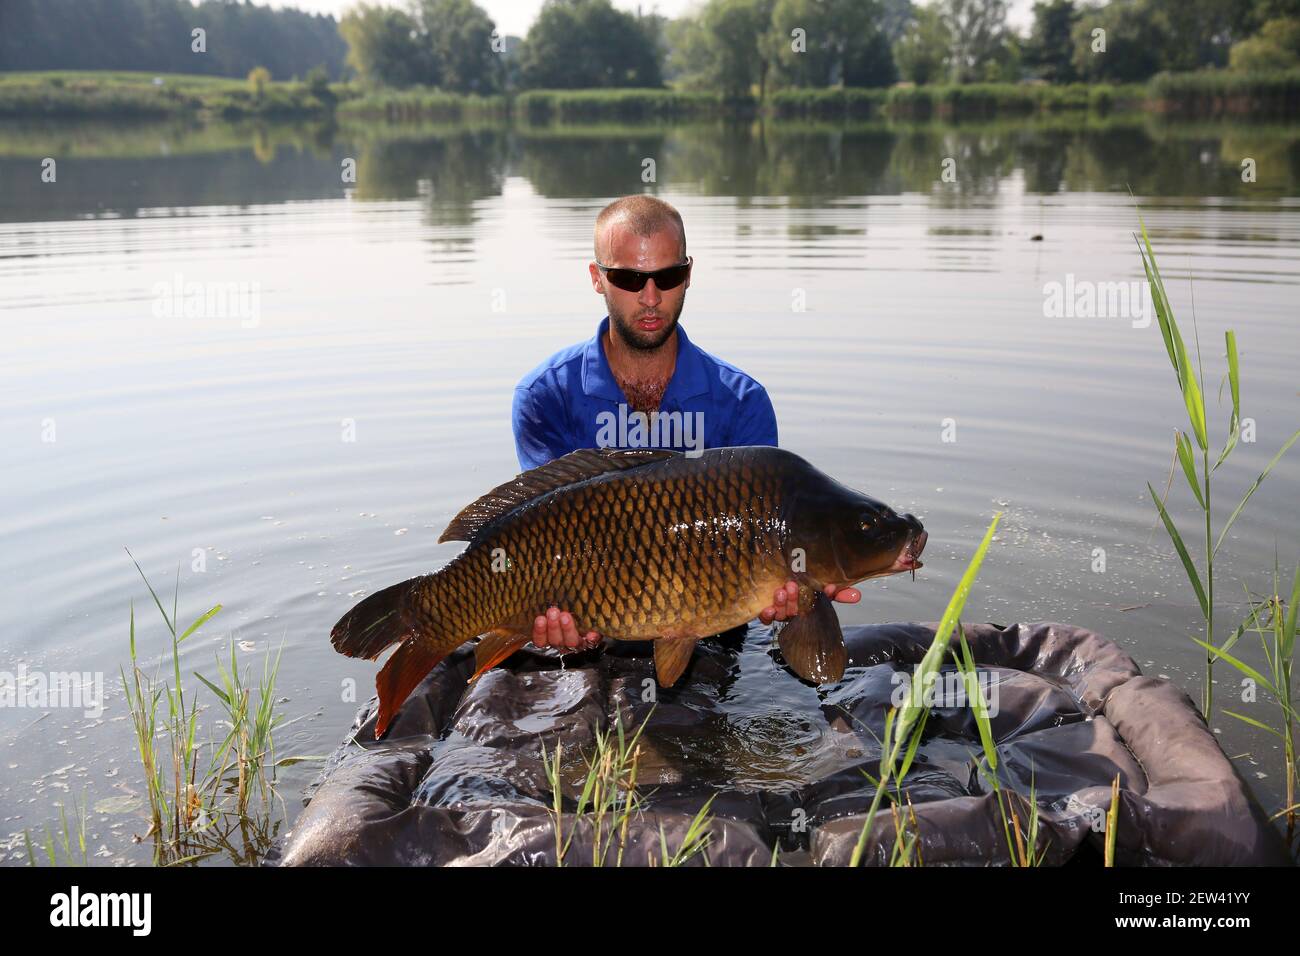 https://c8.alamy.com/comp/2EW41YY/the-angler-has-caught-a-nice-young-carp-and-is-posing-for-photos-the-angler-casts-the-carp-fishing-kit-2EW41YY.jpg